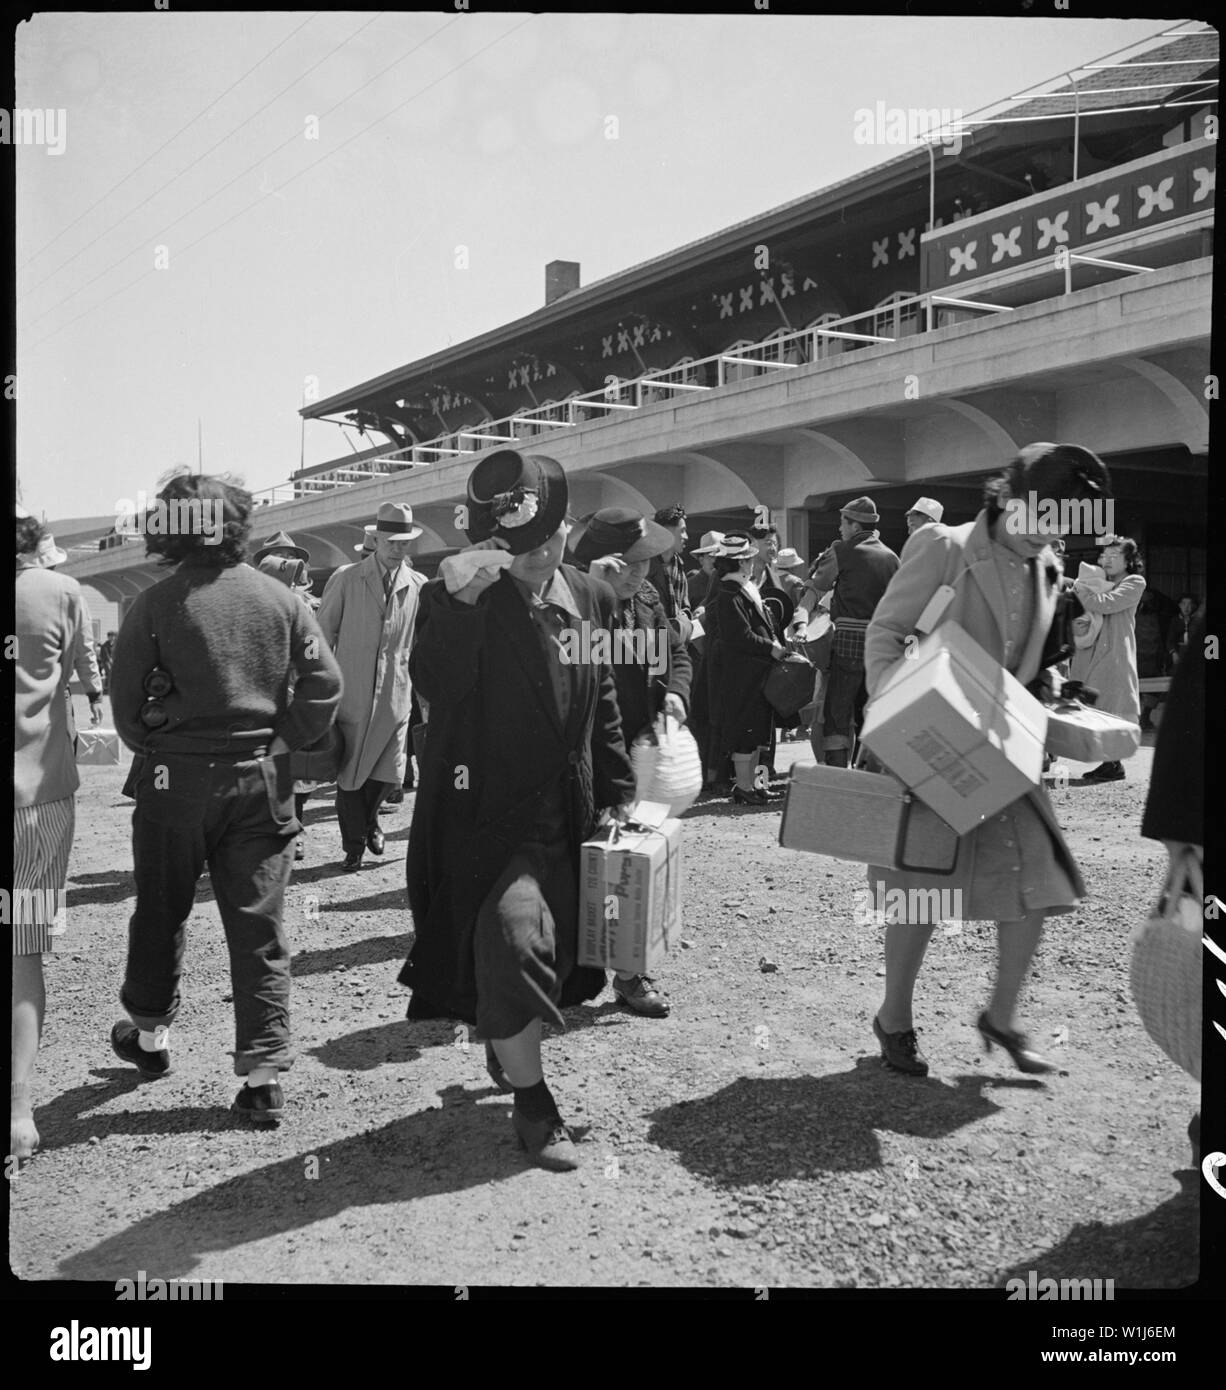 San Bruno, California. Families of Japanese ancestry arrive at assembly center at Tanforan Race Tra . . .; Scope and content:  The full caption for this photograph reads: San Bruno, California. Families of Japanese ancestry arrive at assembly center at Tanforan Race Track. Evacuees will be transferred later to War Relocation Authority centers where they will be housed for the duration. Stock Photo